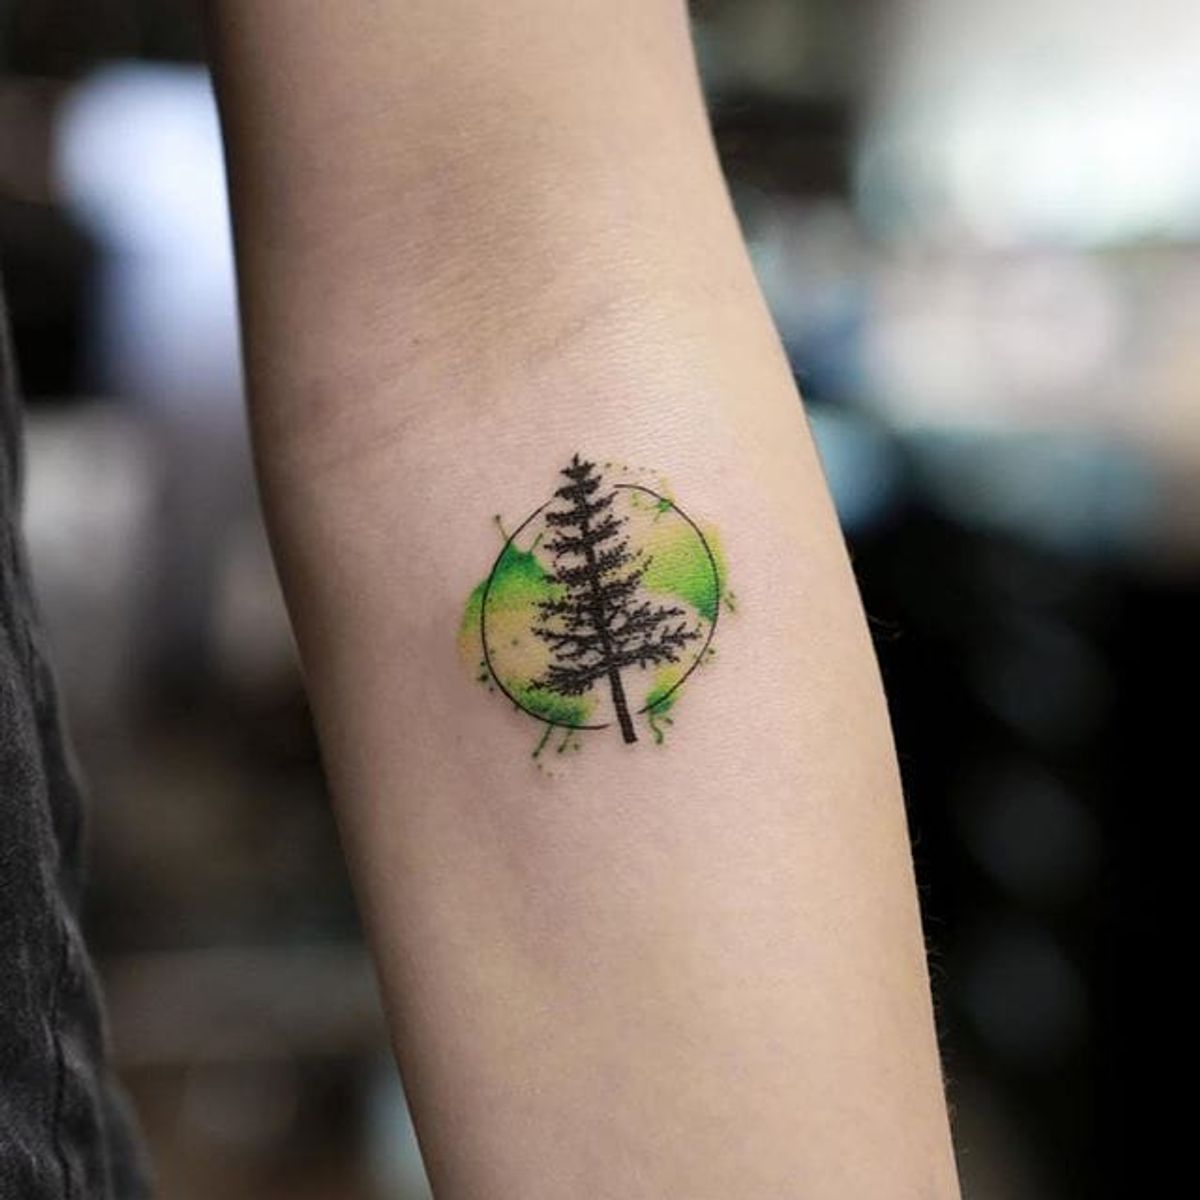 Tattoo uploaded by Stacie Mayer • Miniature illustrative watercolor ...